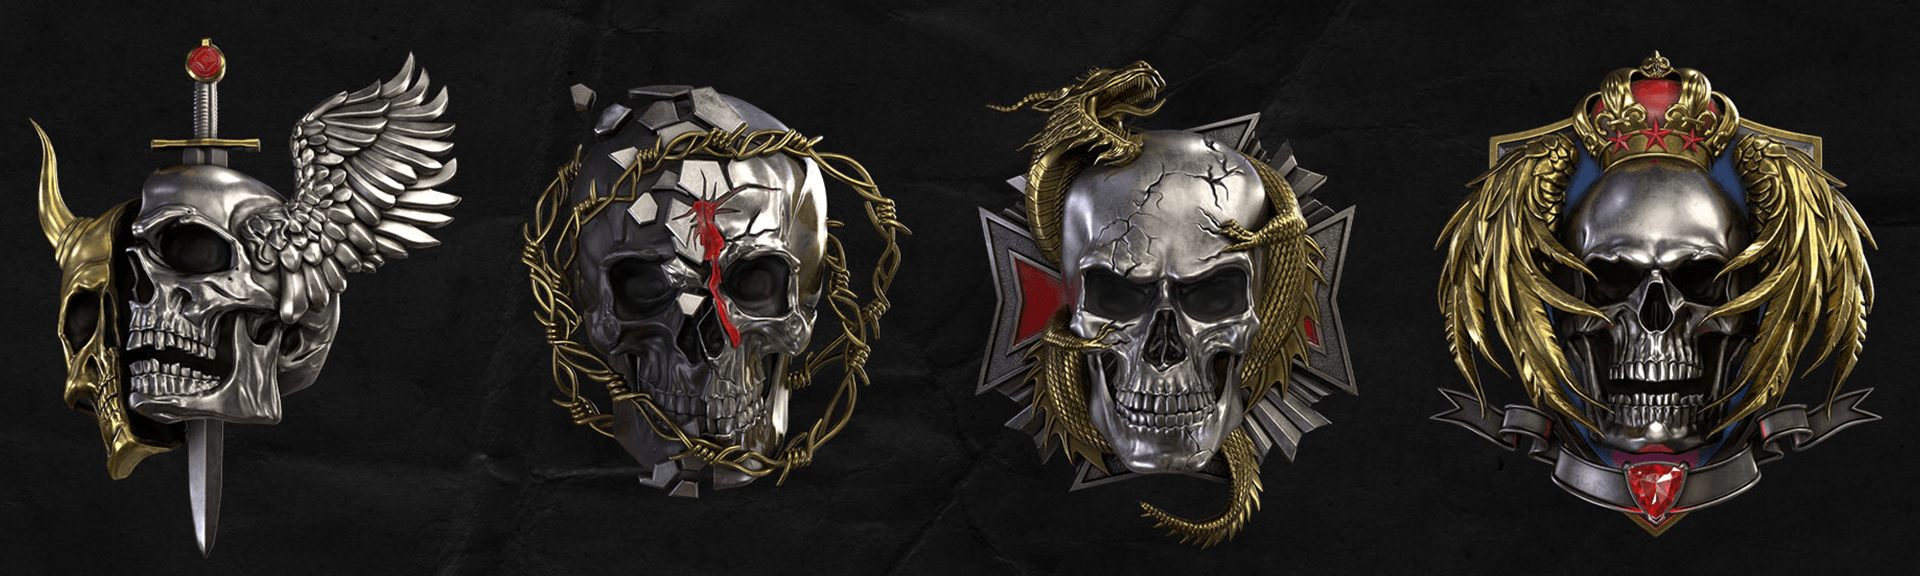 Image of the new Prestige Icons - a bunch of spooky heads